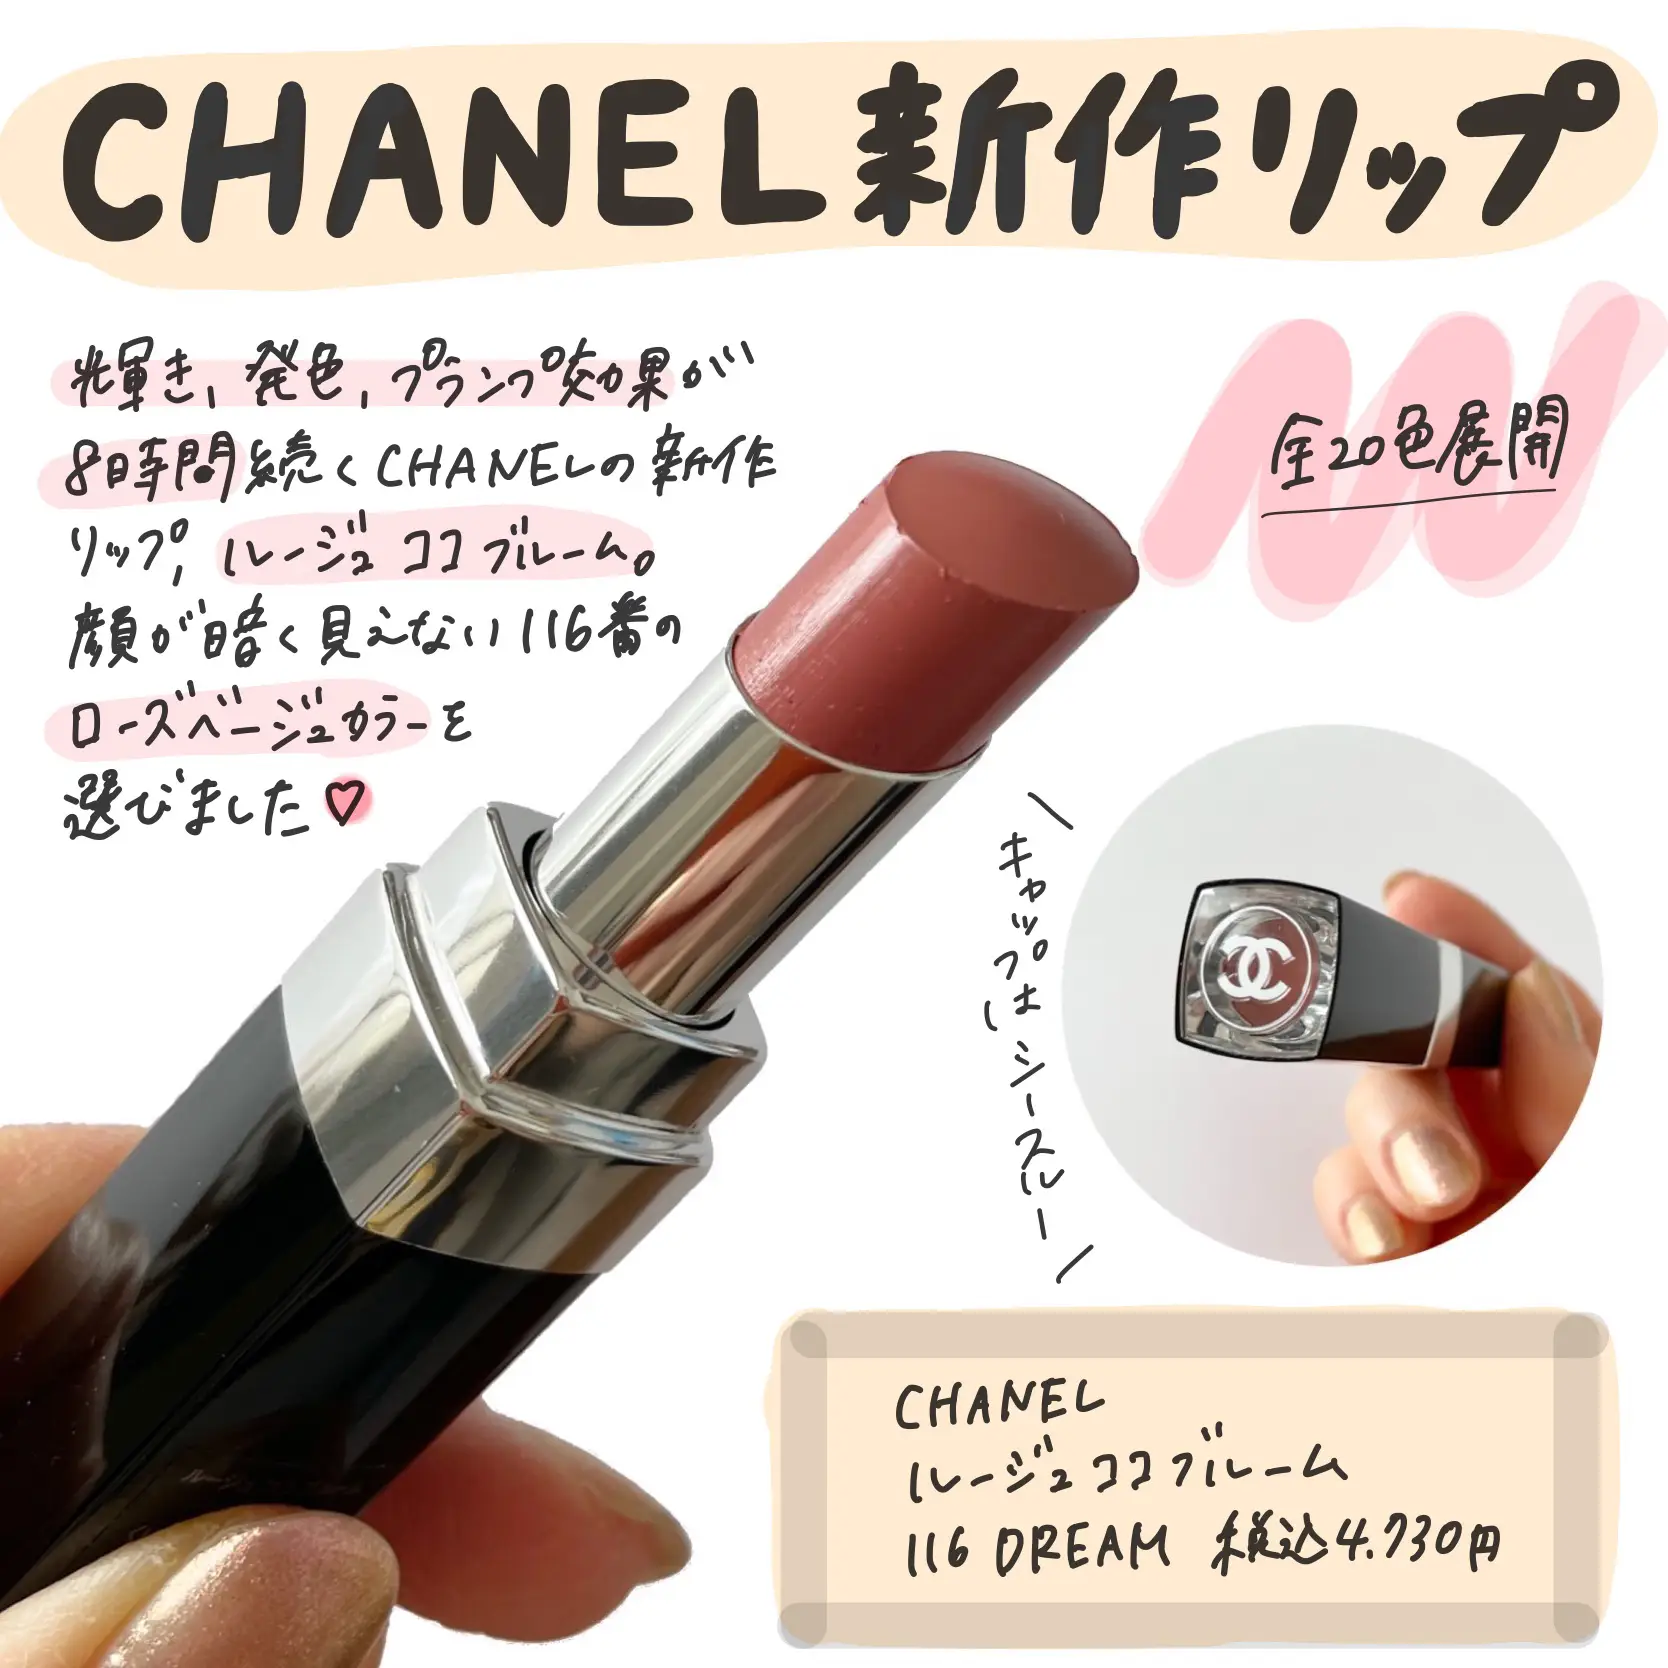 CHANEL New Lip 💄 】, Gallery posted by SUZY